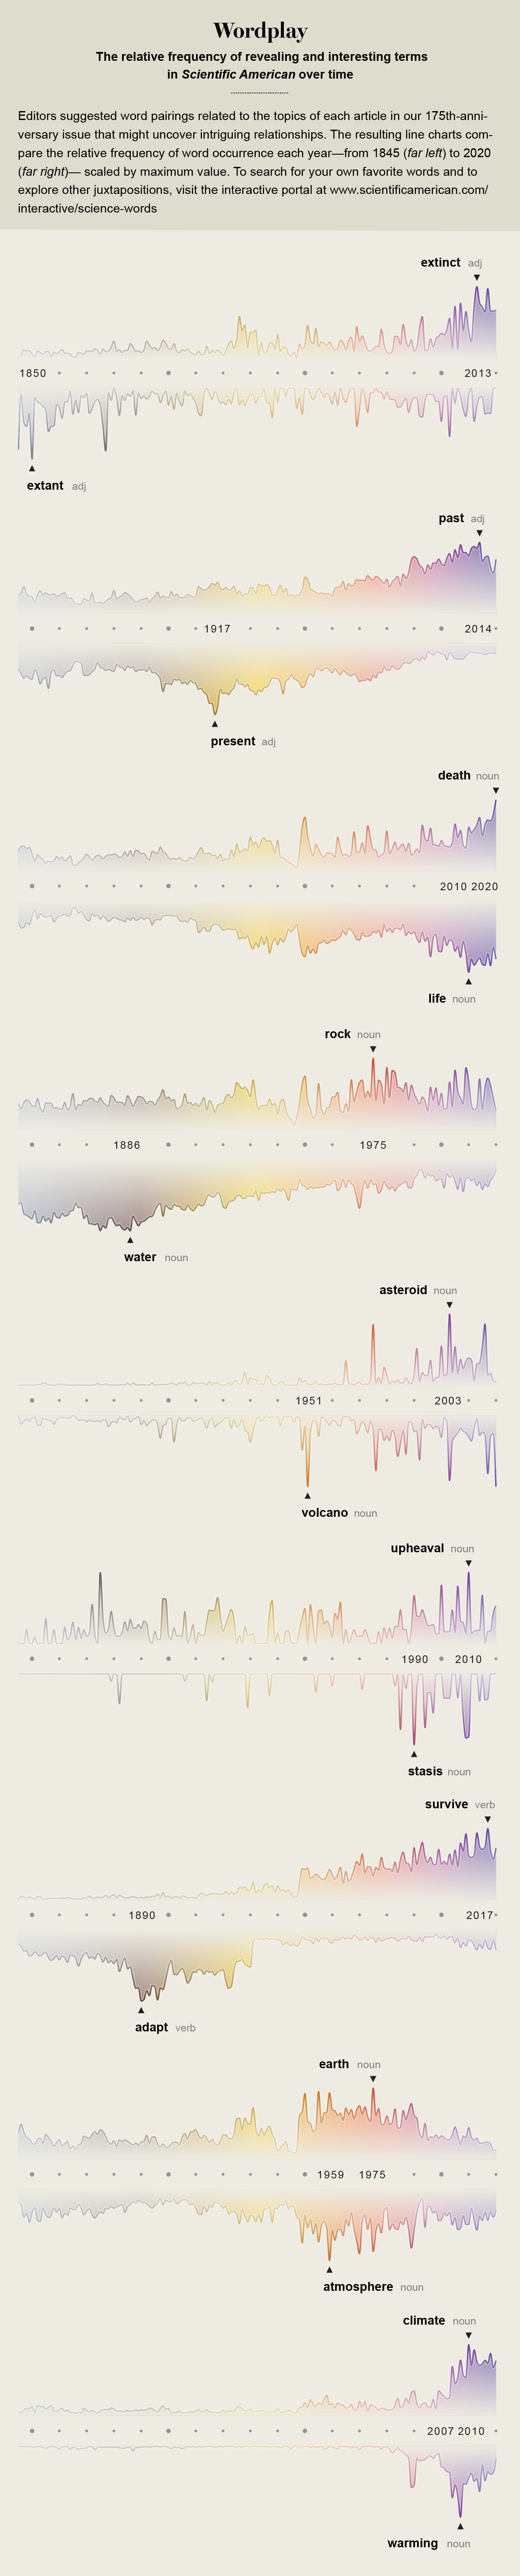 In honor of Scientific American’s 175th anniversary: Relative frequency of terms in the magazine, from 1845 to the present.